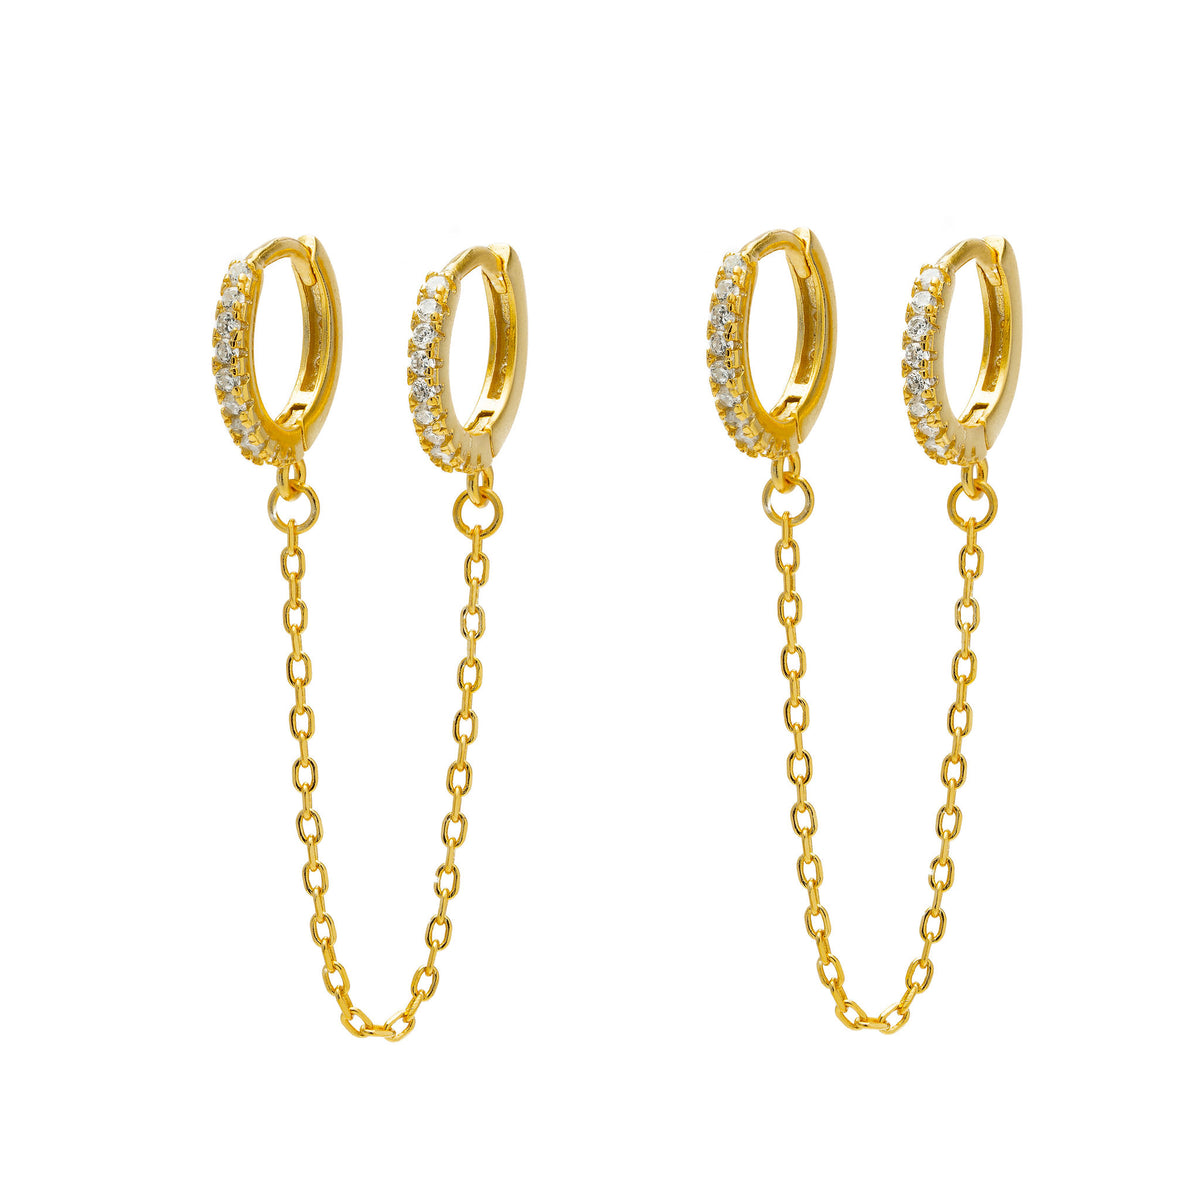 PAVED HANDCUFF GOLD HOOPS